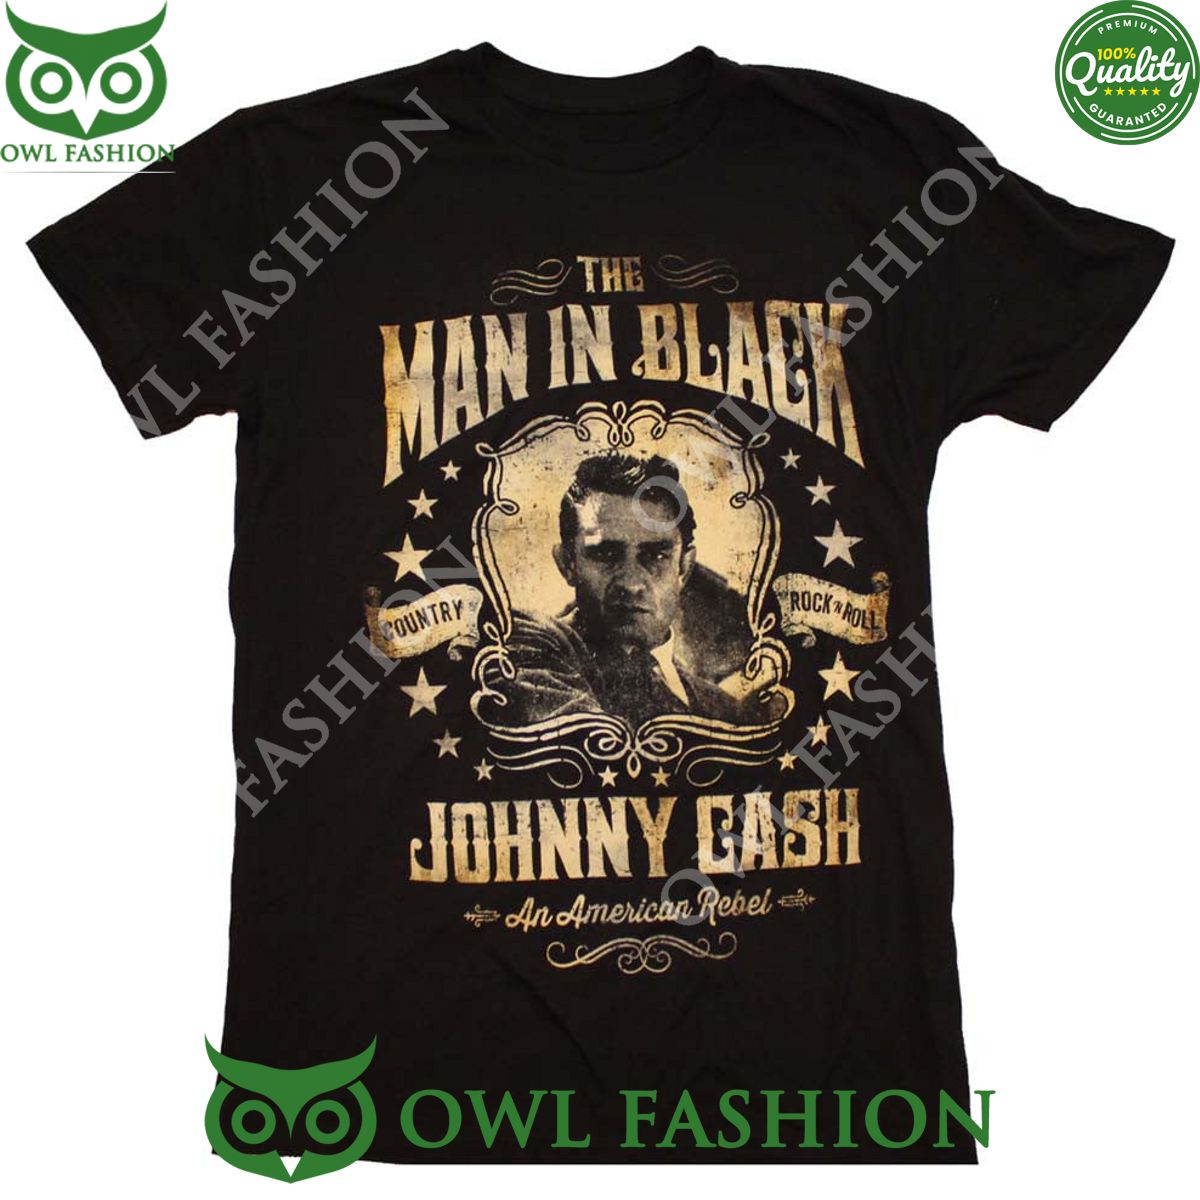 johnny cash a portrait man in black country rock and roll rebel t shirt 1 1FLzS.jpg